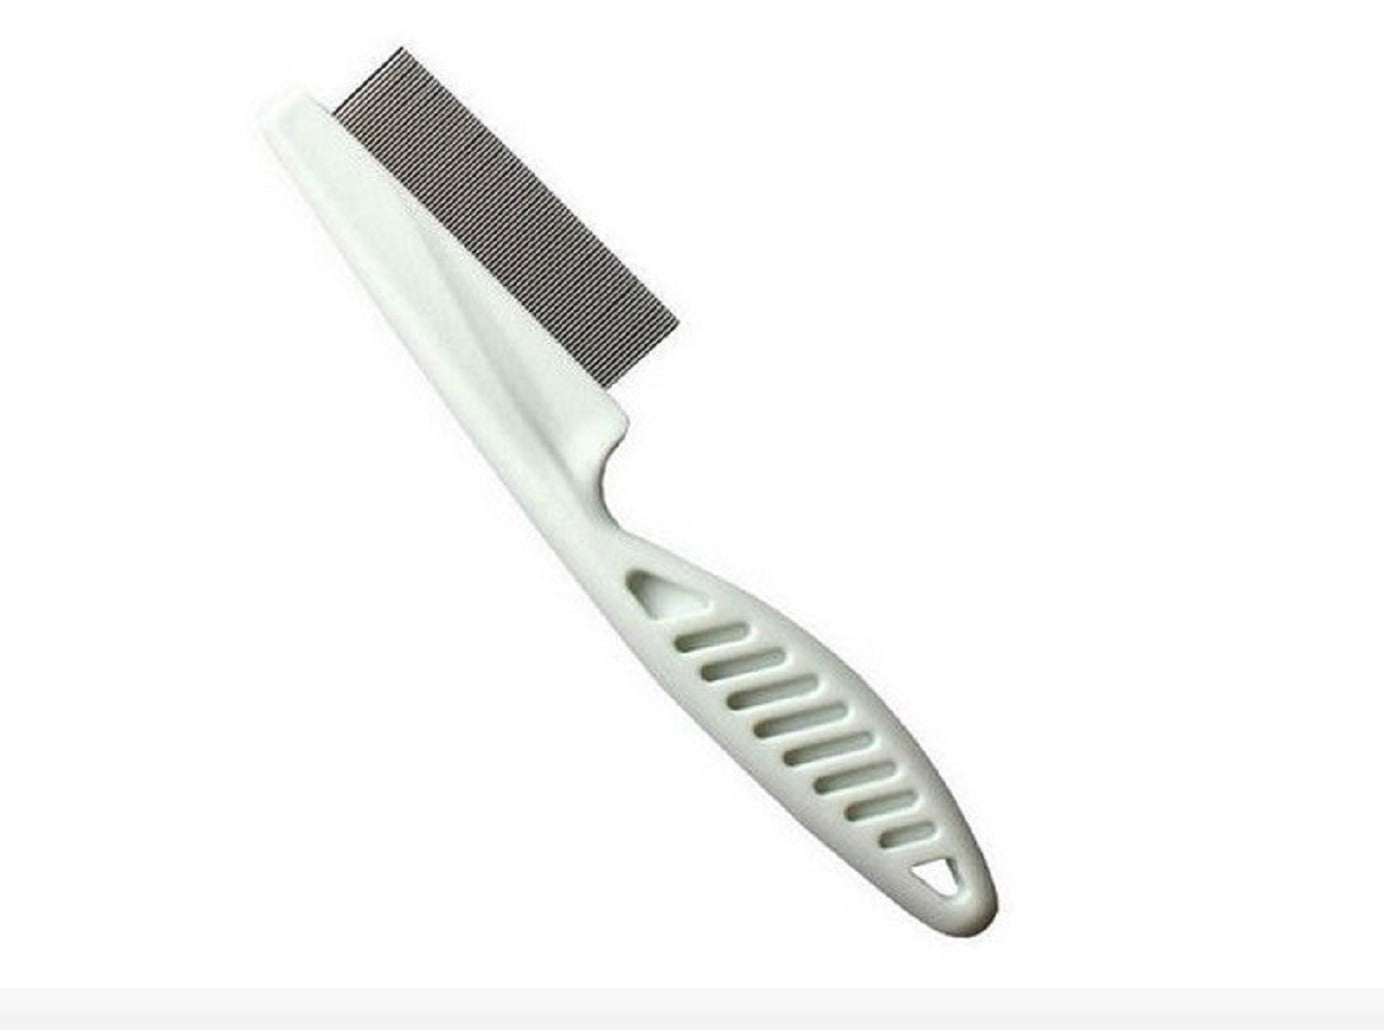 Stainless Steel Comb Hair Brush Shedding Flea For Cat Dog Pets Trimmer Grooming 